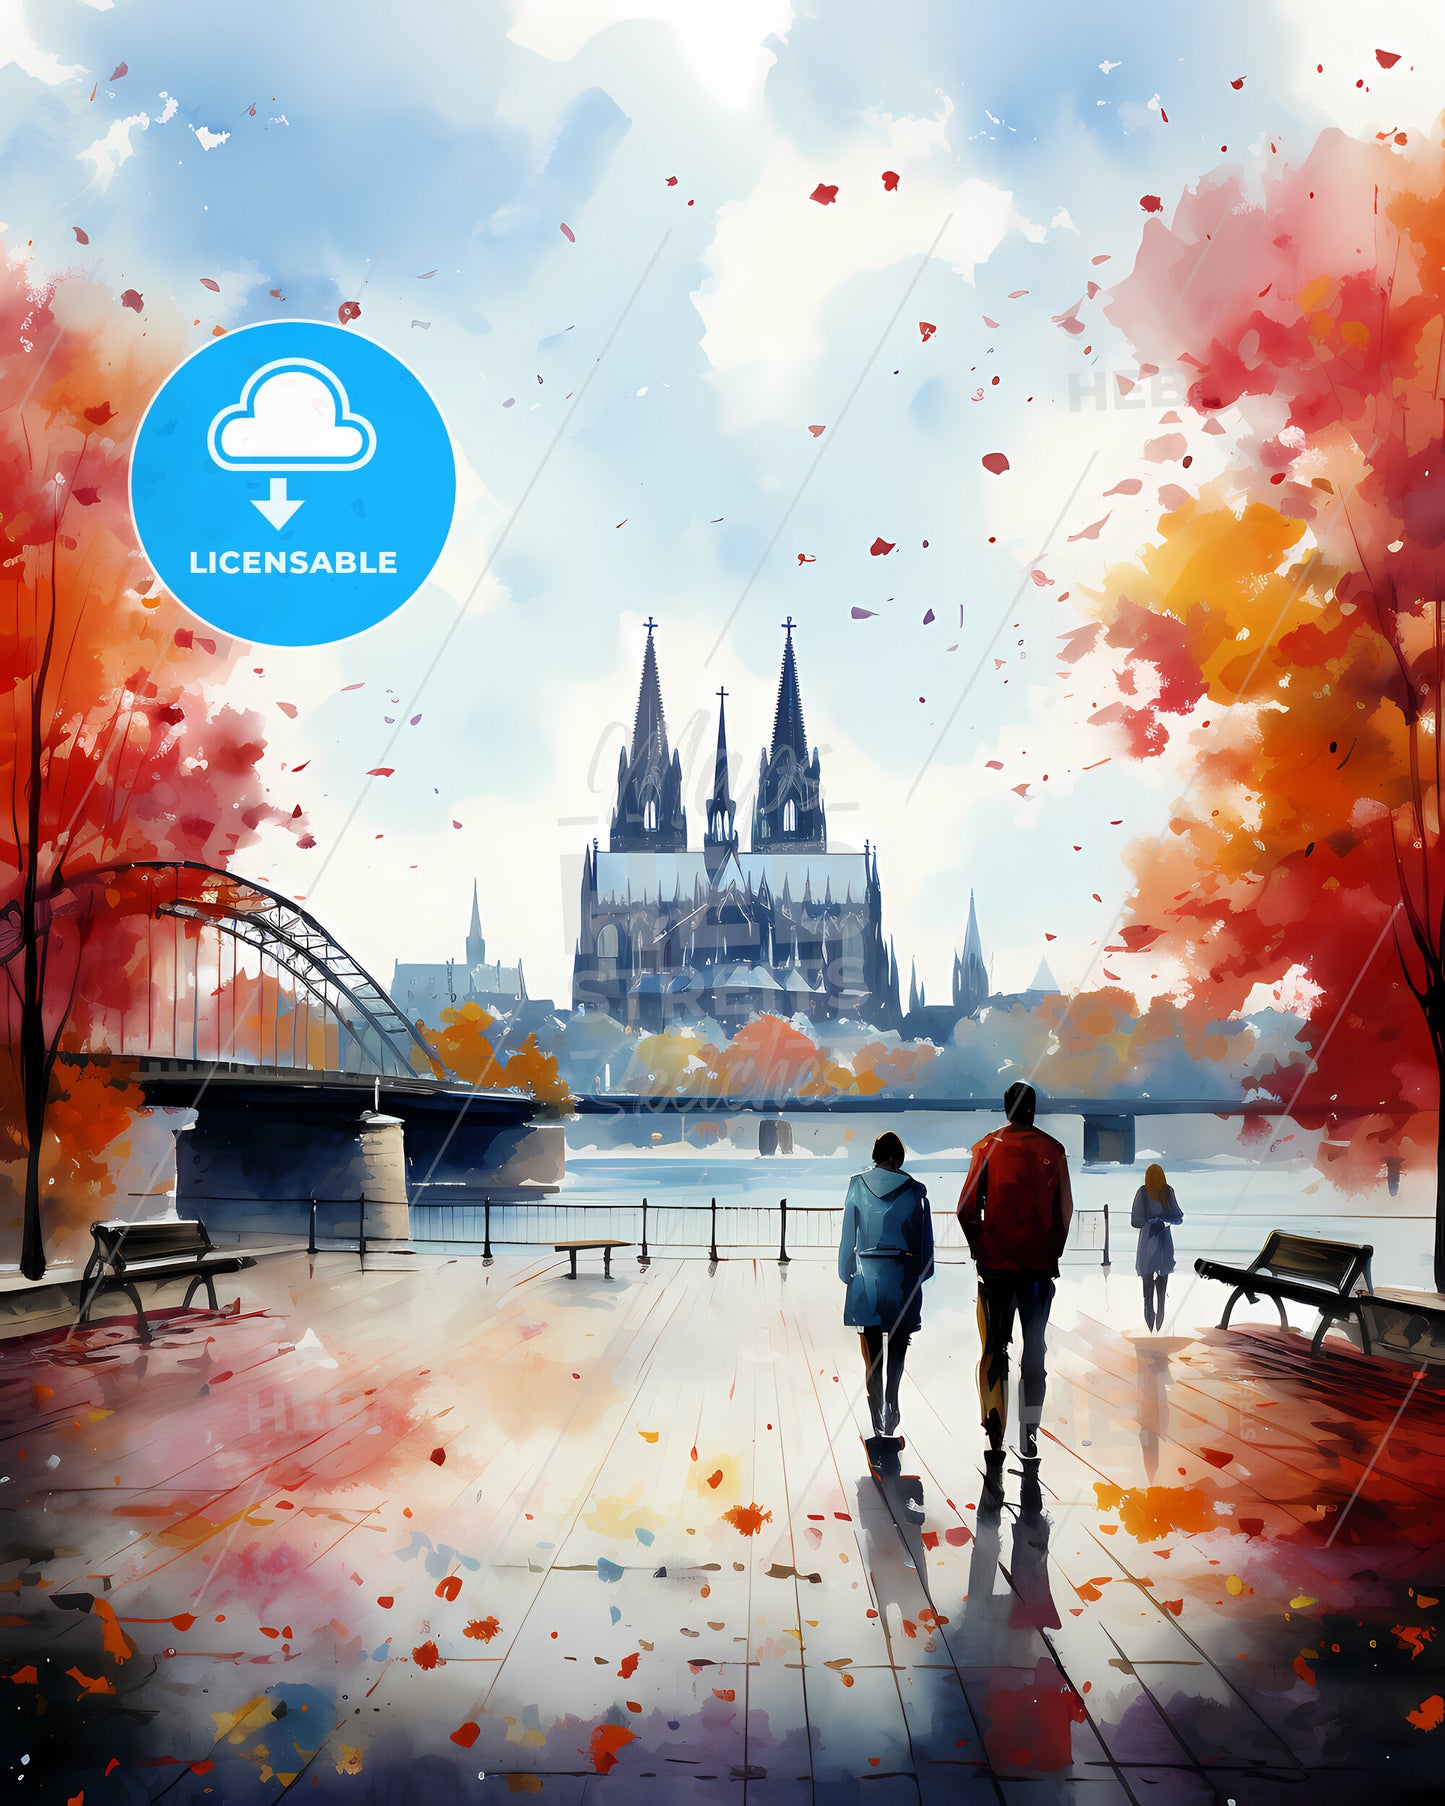 Cologne, Germany - A Watercolor Painting Of A Couple Of People Walking On A Boardwalk